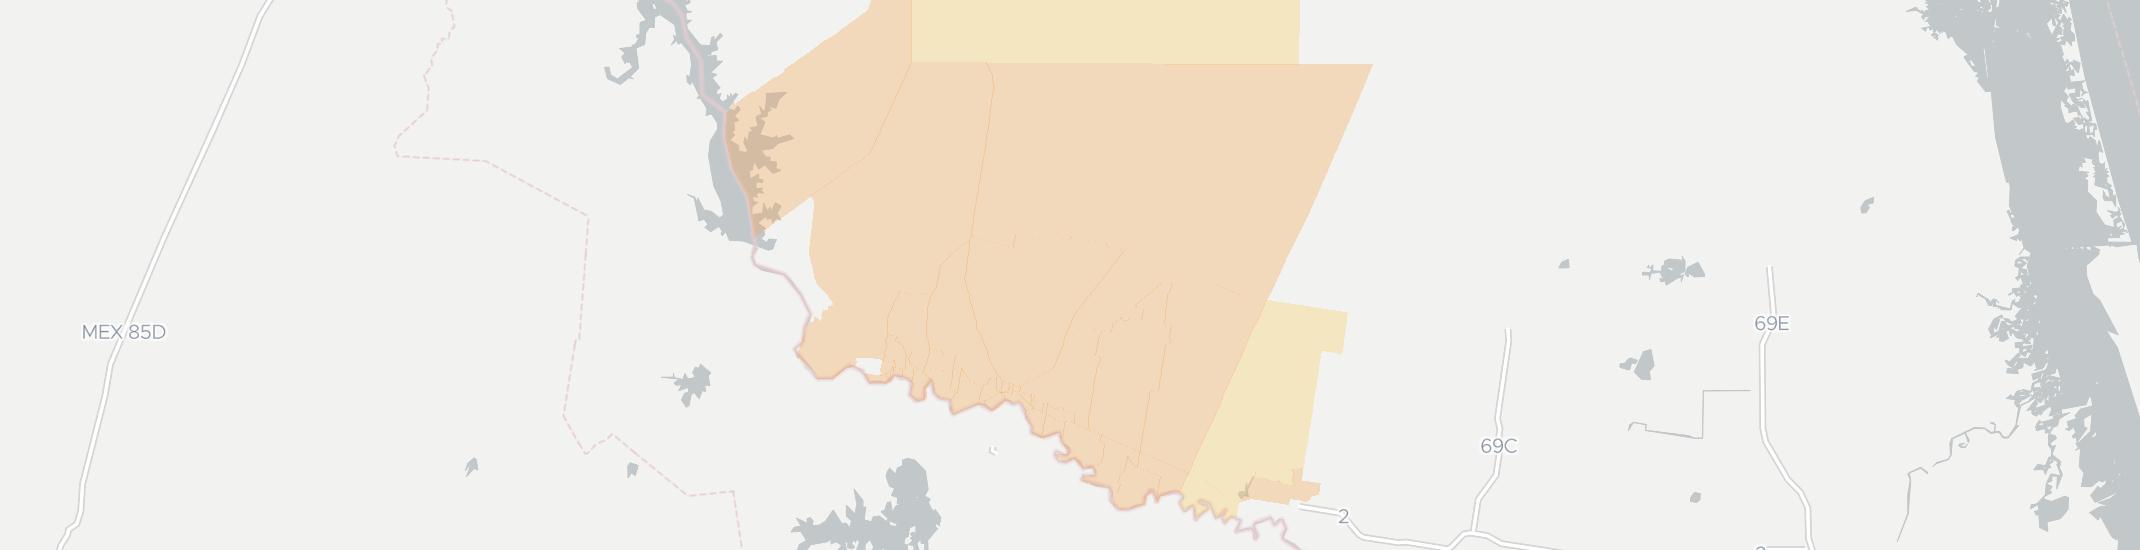 Rio Grande City Internet Competition Map. Click for interactive map